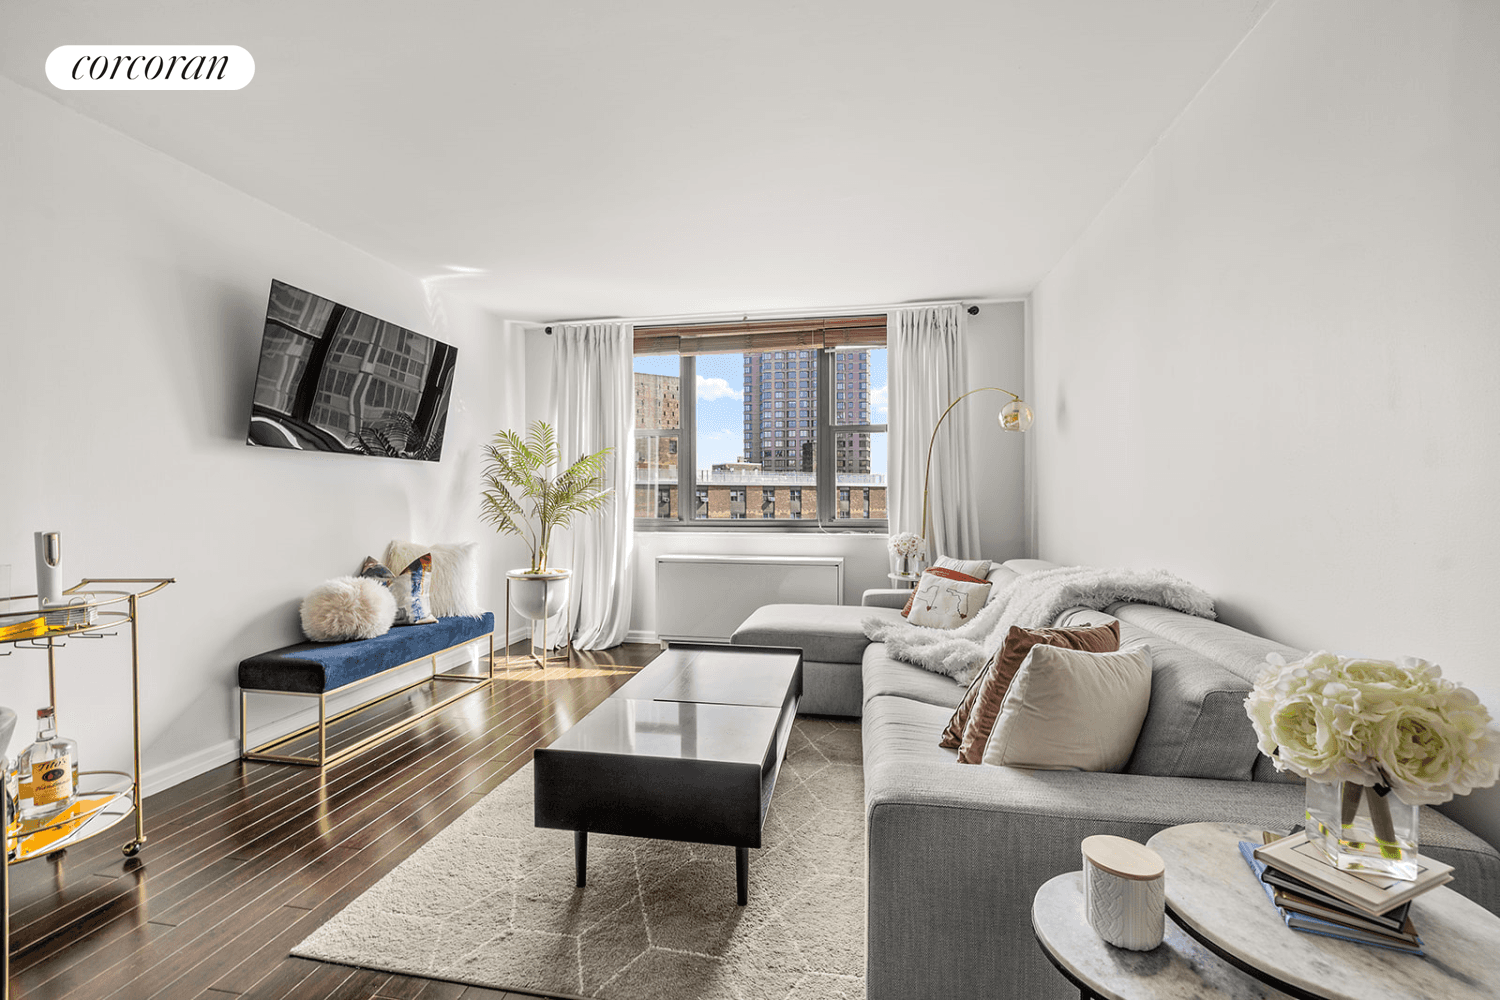 340 E. 93rd Street, 25H, New York, New York 10128Proudly presenting an immaculate one bedroom and one bath co op unit in the prestigious Plymouth Tower.